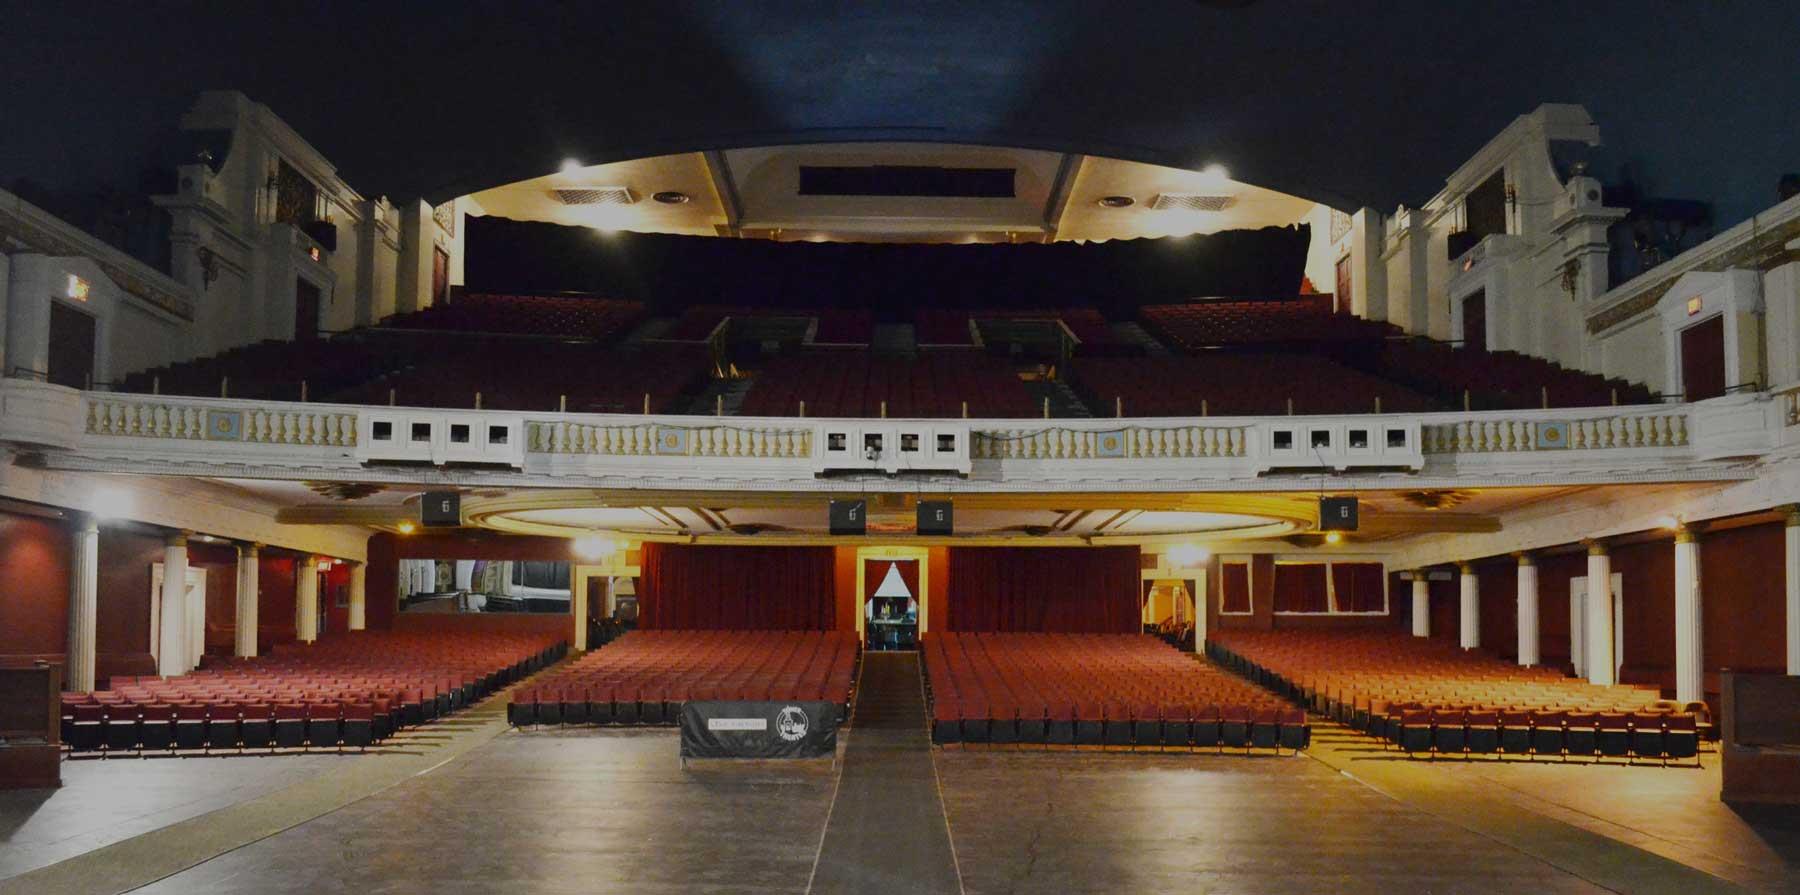 The Tower Theatre in Upper Darby, PA